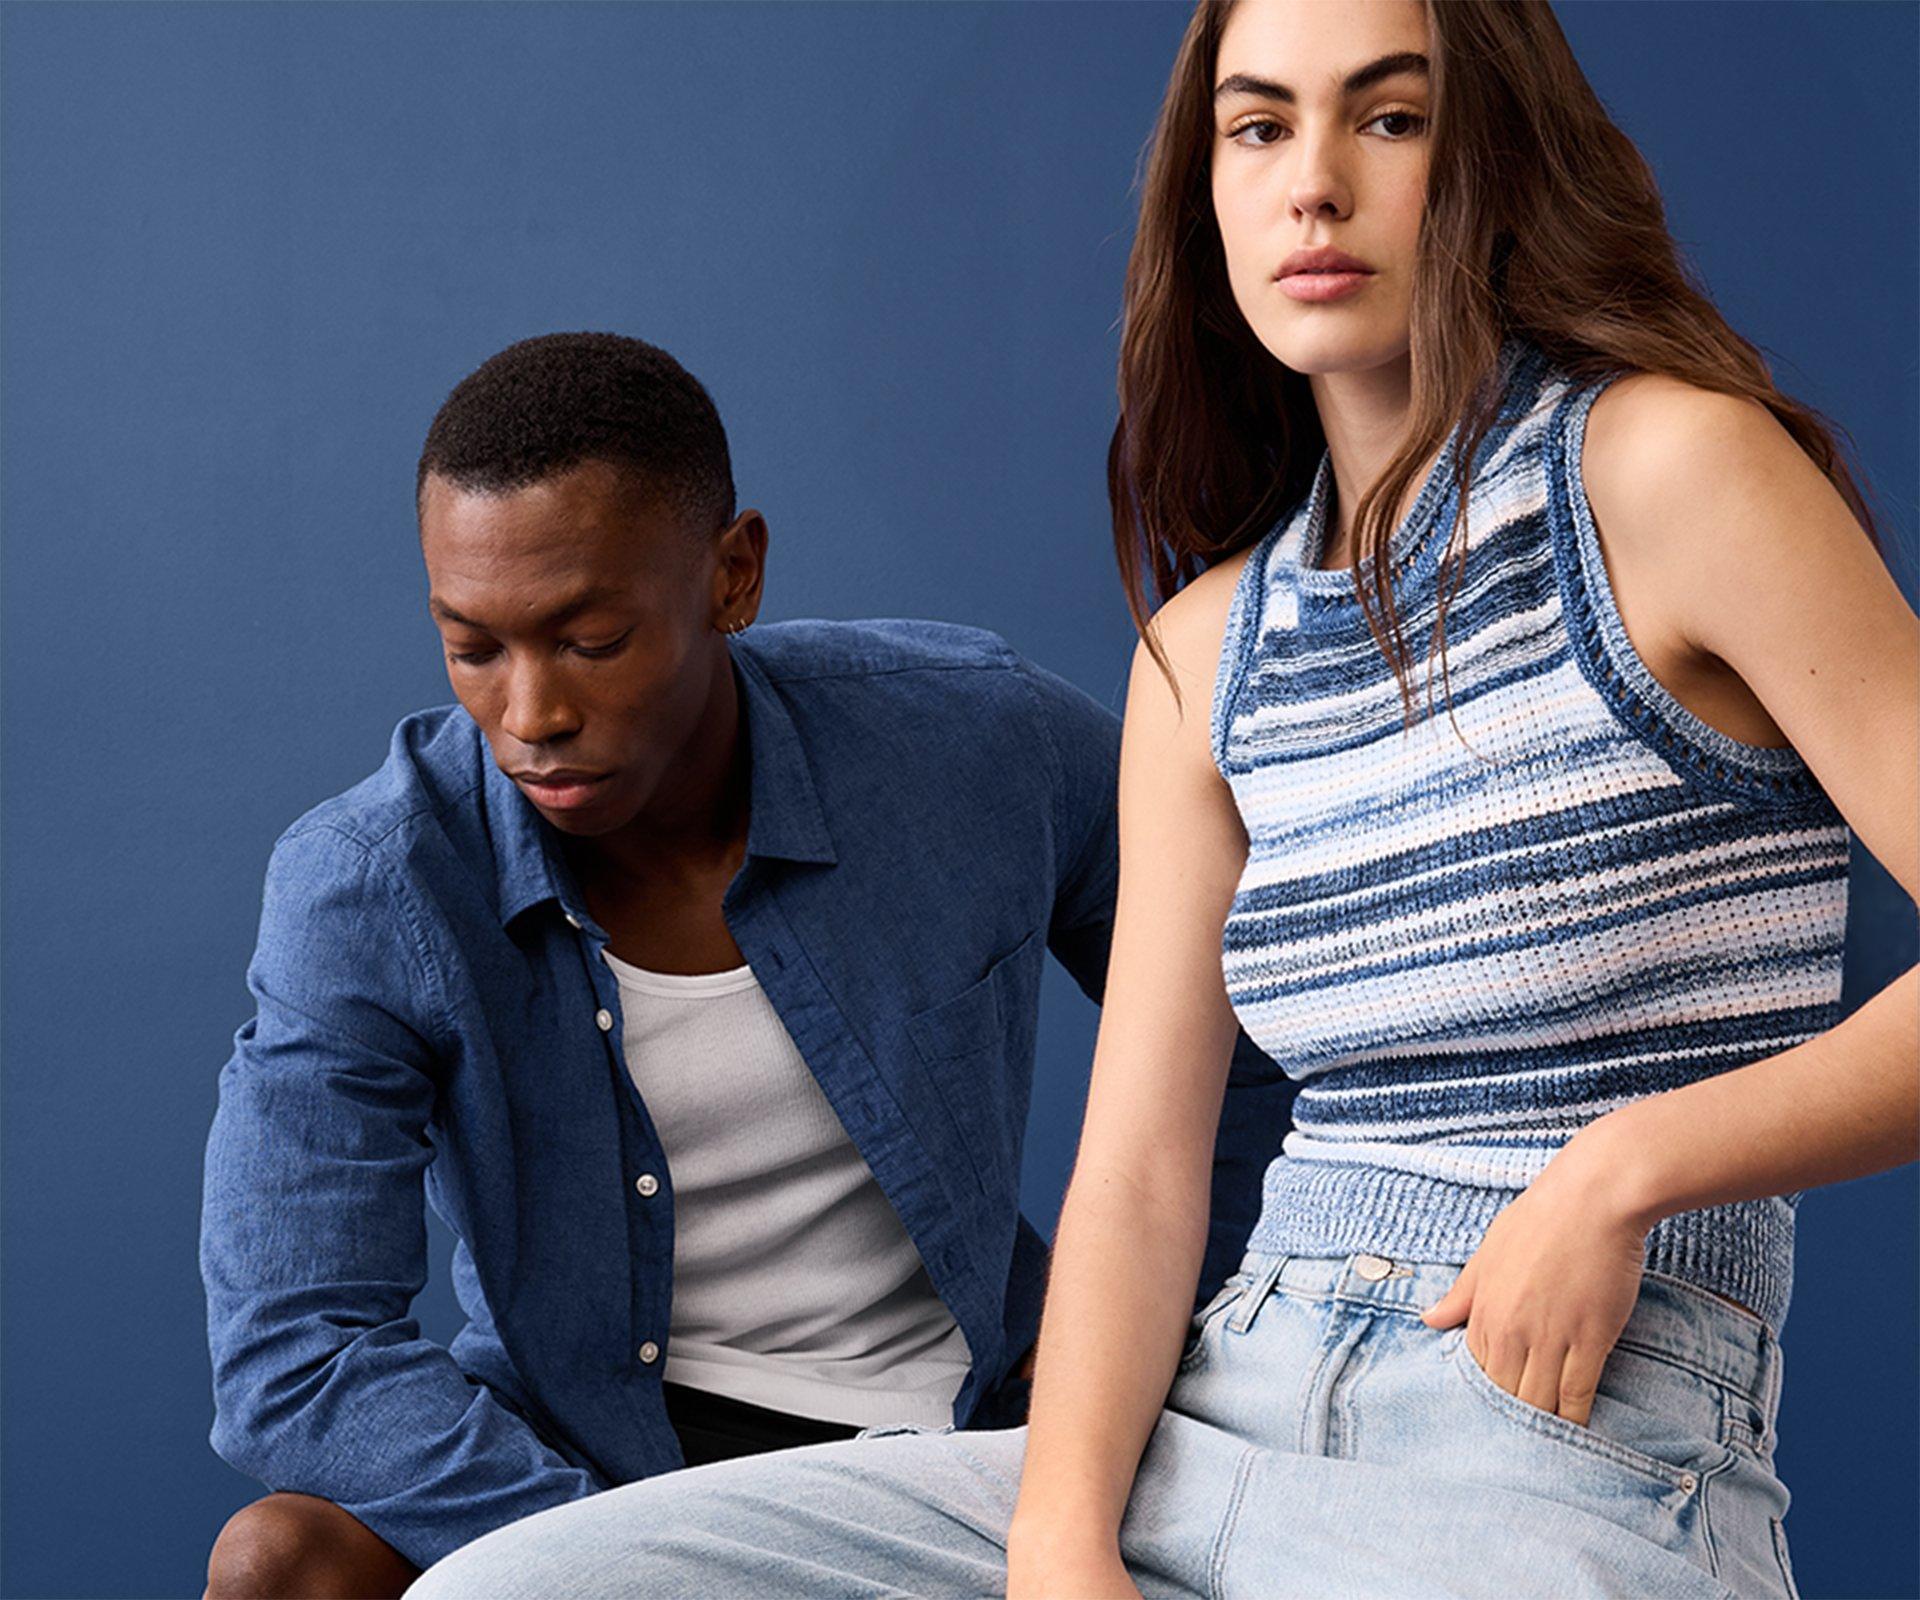 New Arrivals: Aspirational Casual, Cool, Classic Gap Styles